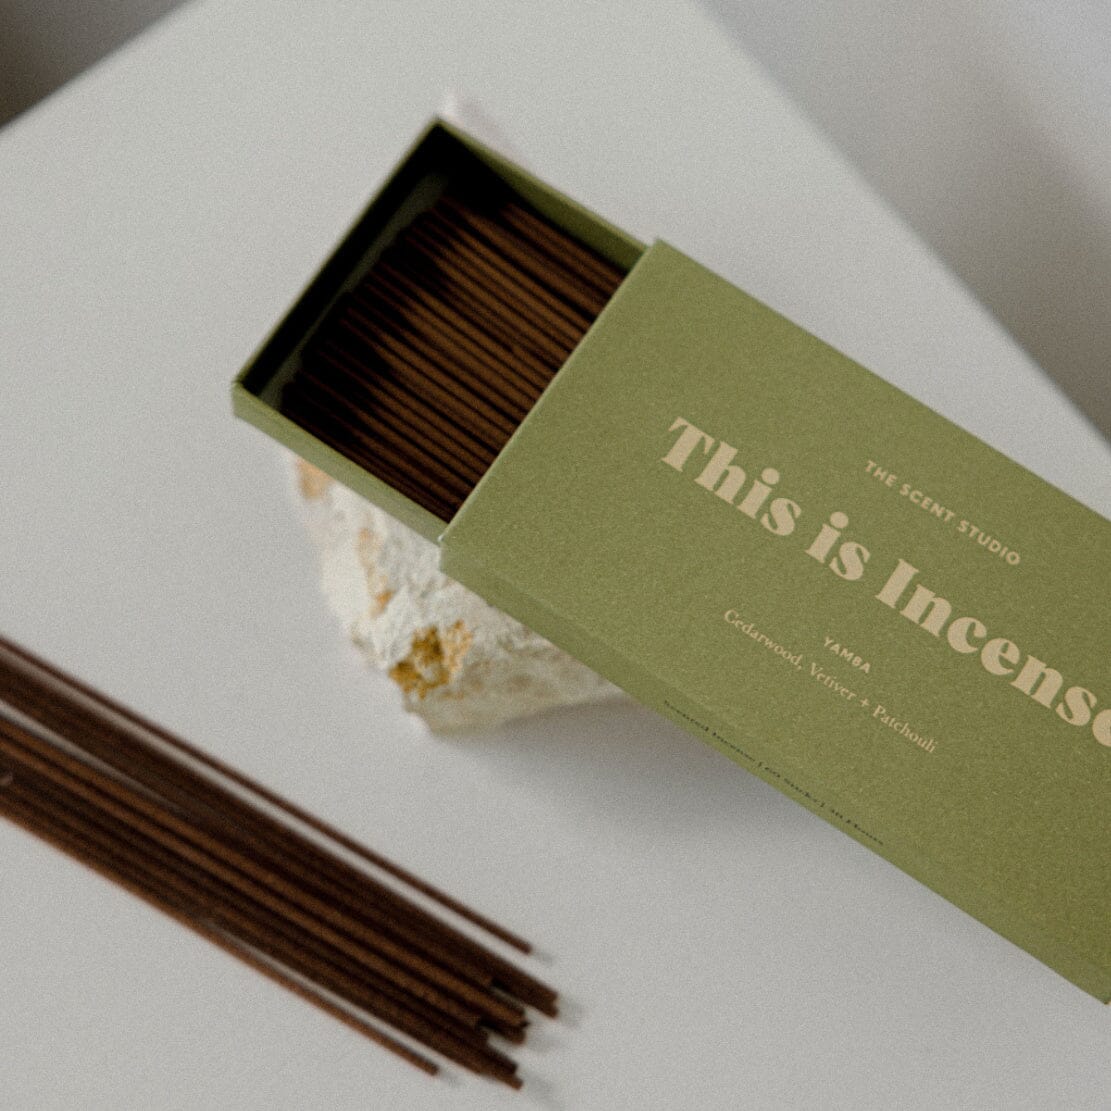 Same Day Gift Delivery Melbourne & Geelong | Australia-wide Gift Delivery | Buy Gentle Habits This is Incense Online